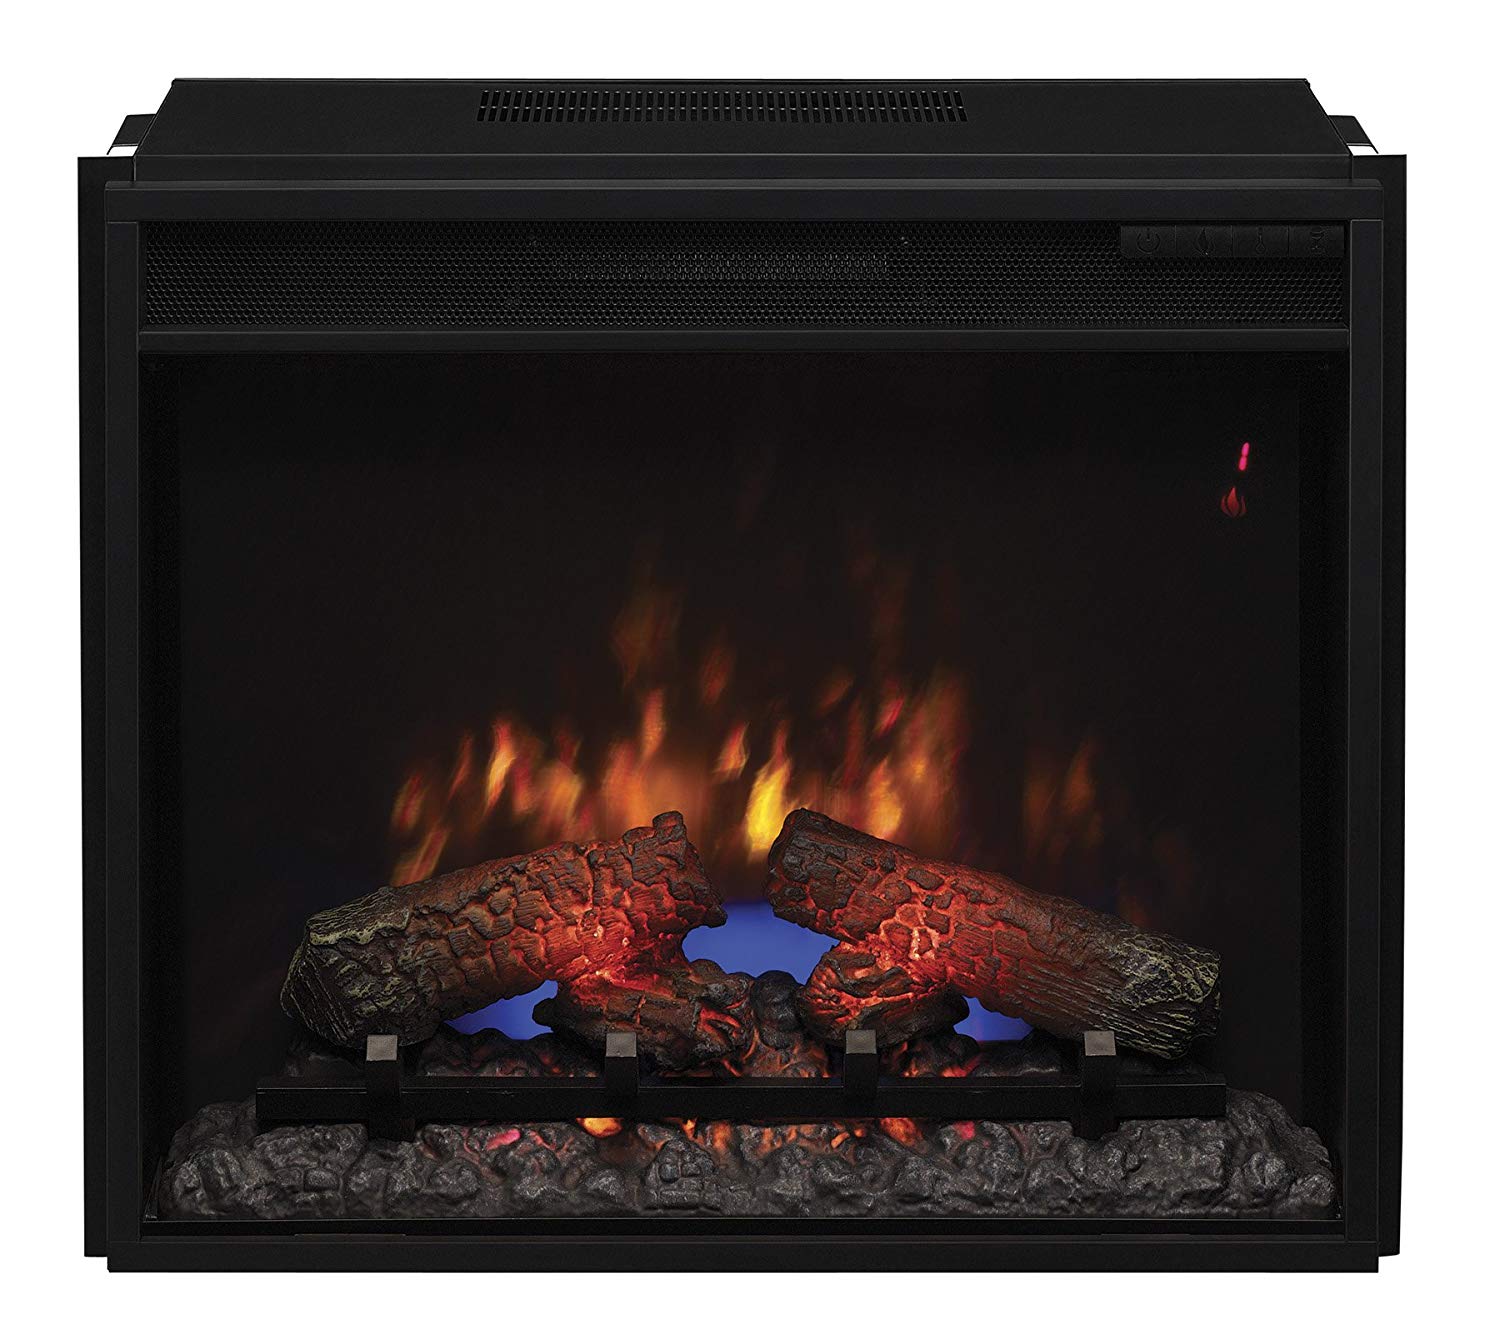 Infrared Fireplace Heater Tv Stand Unique Classicflame 23ef031grp 23" Electric Fireplace Insert with Safer Plug